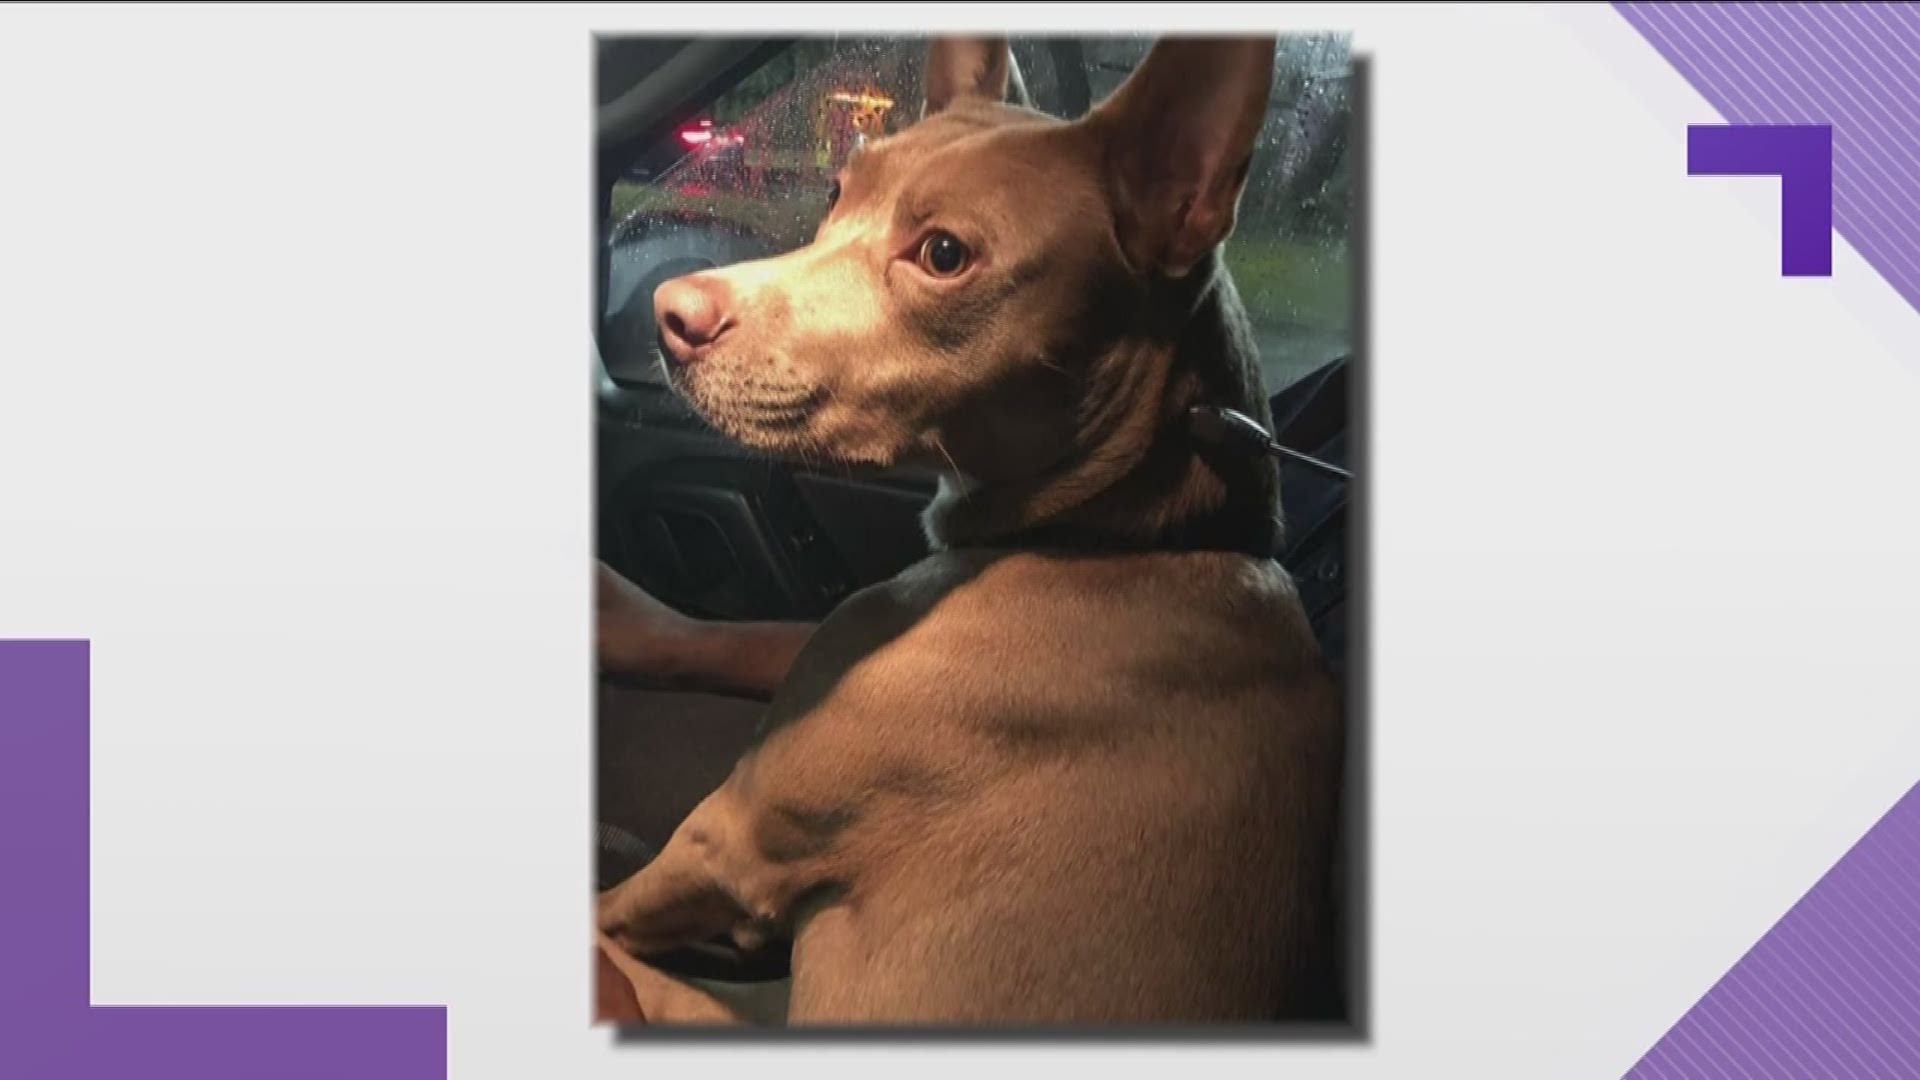 The dog, named Kyng, ran away after his owner was in a crash in DeKalb County. David Jaiman and his dog have since been reunited.